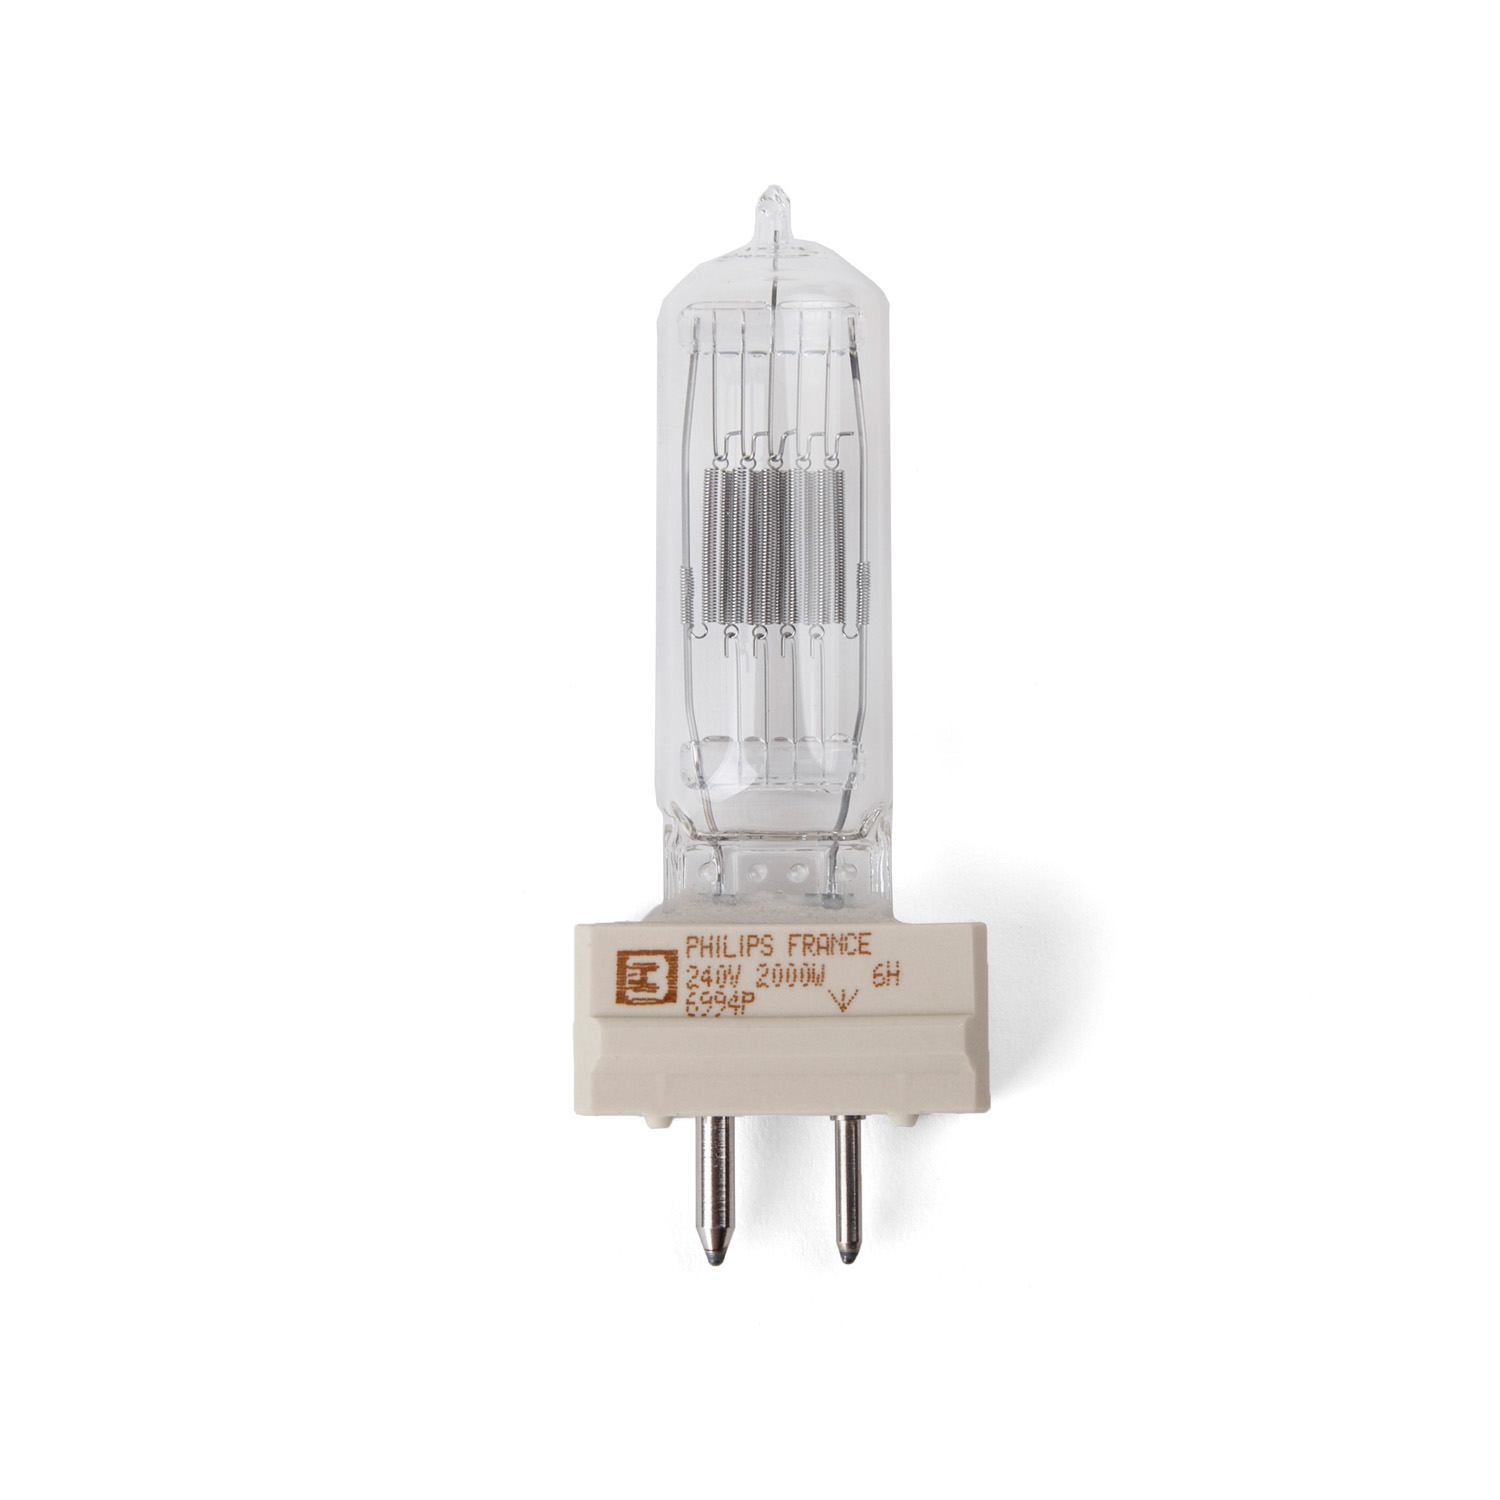 HGS2302000 Spare halogen lamp, 230V 2000W GY16